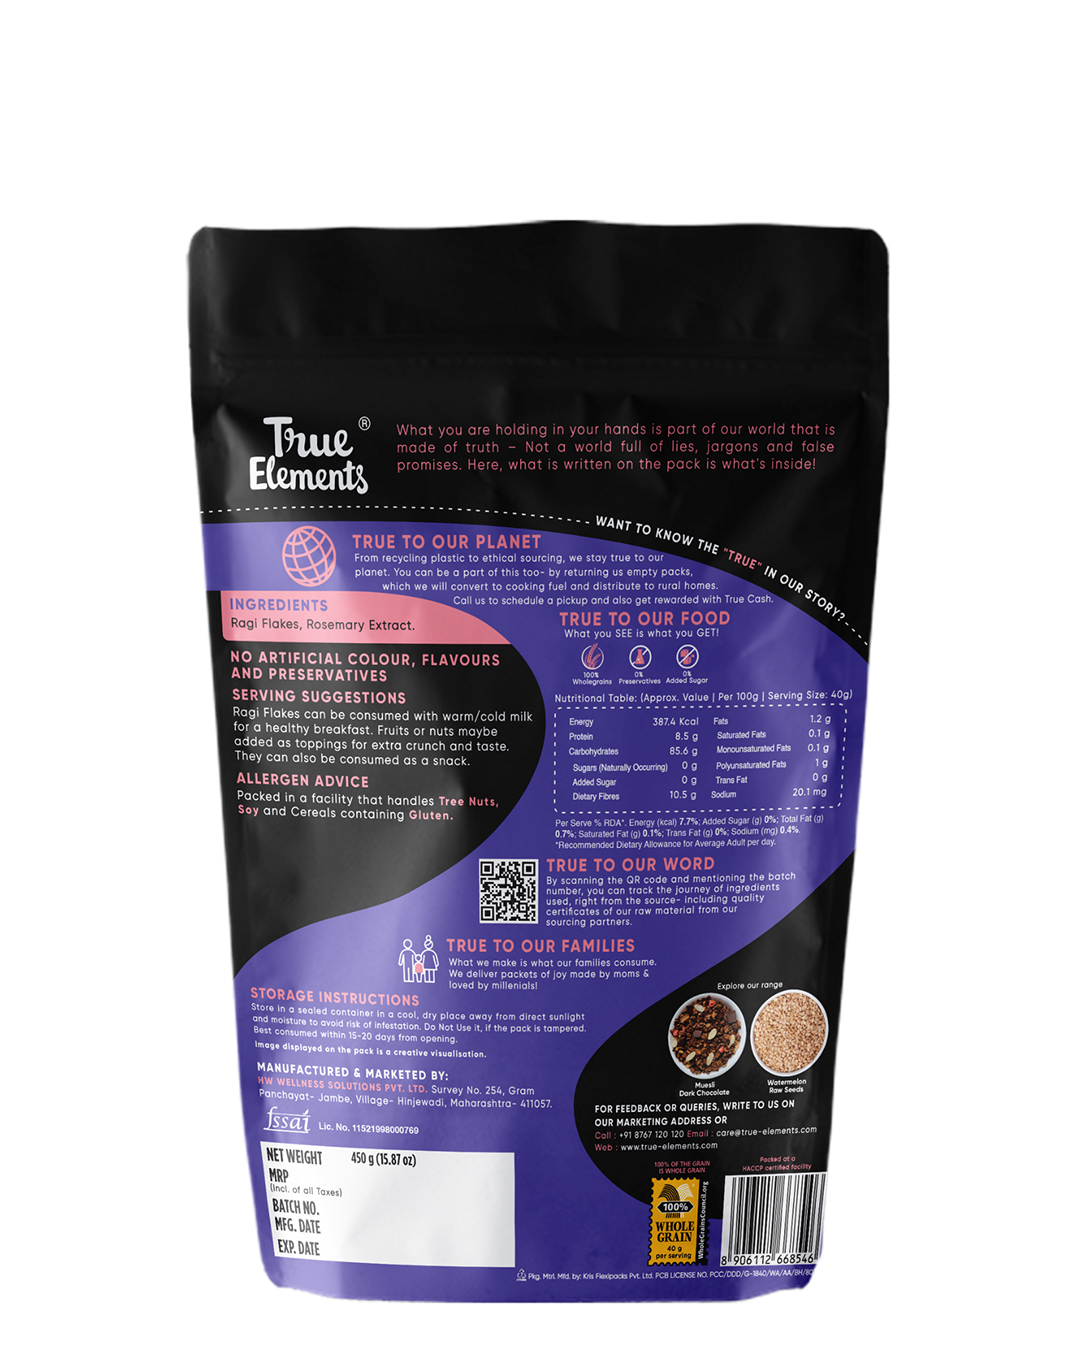 True Elements Ragi Flakes 450gm ingredients and nutritional value